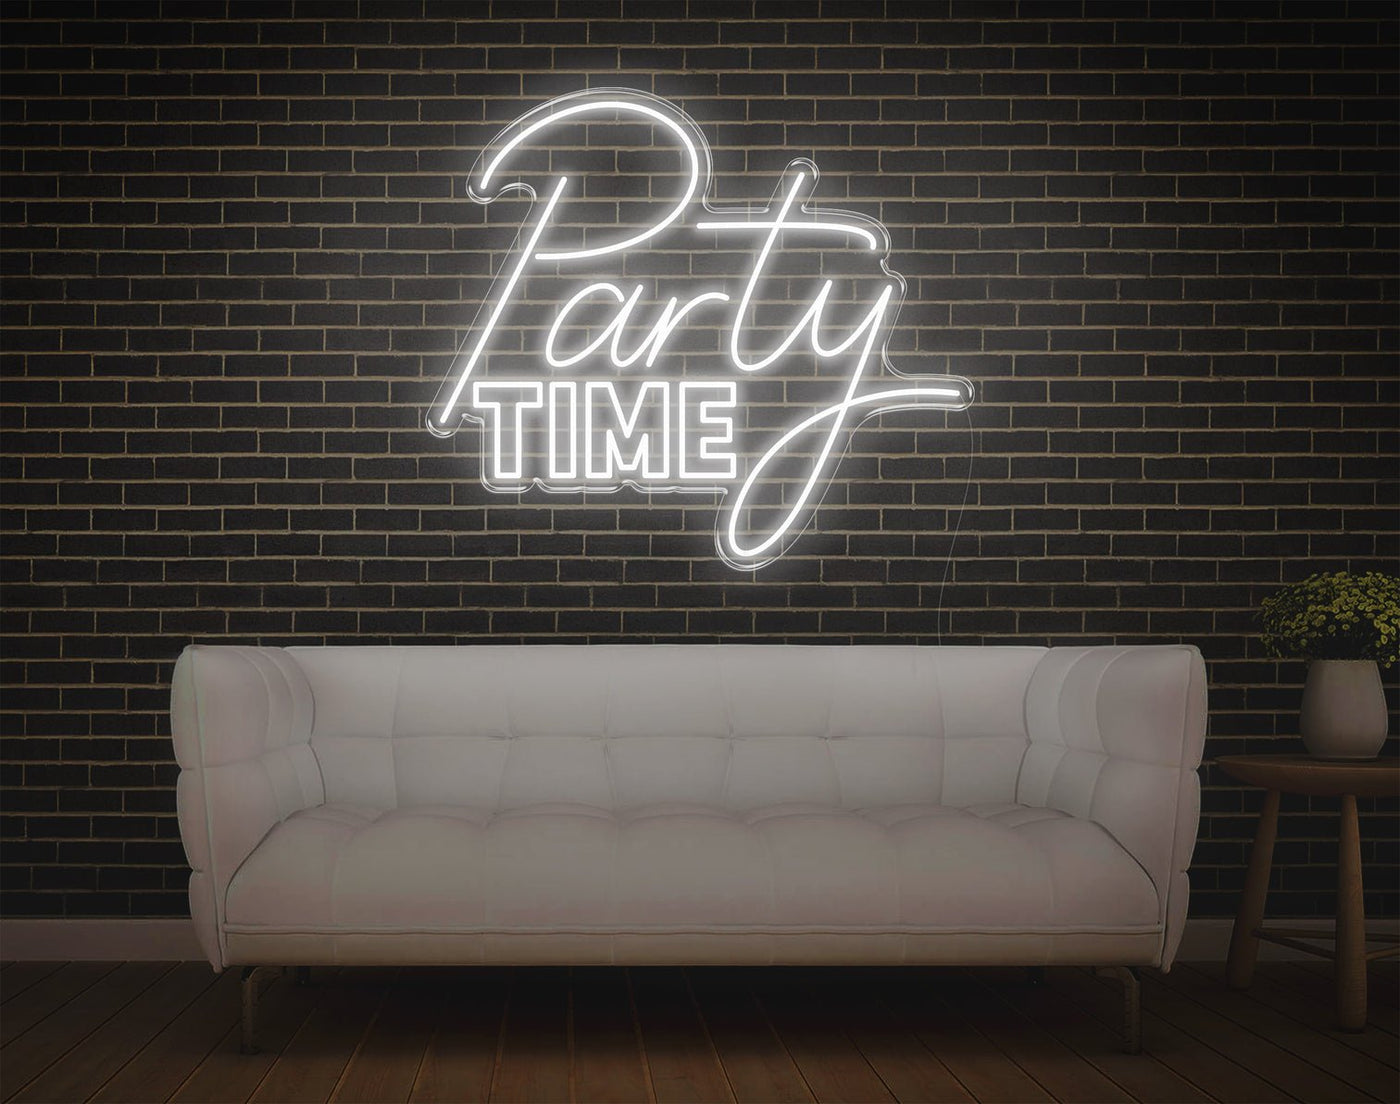 Party Time LED Neon Sign - 27inch x 31inchWhite